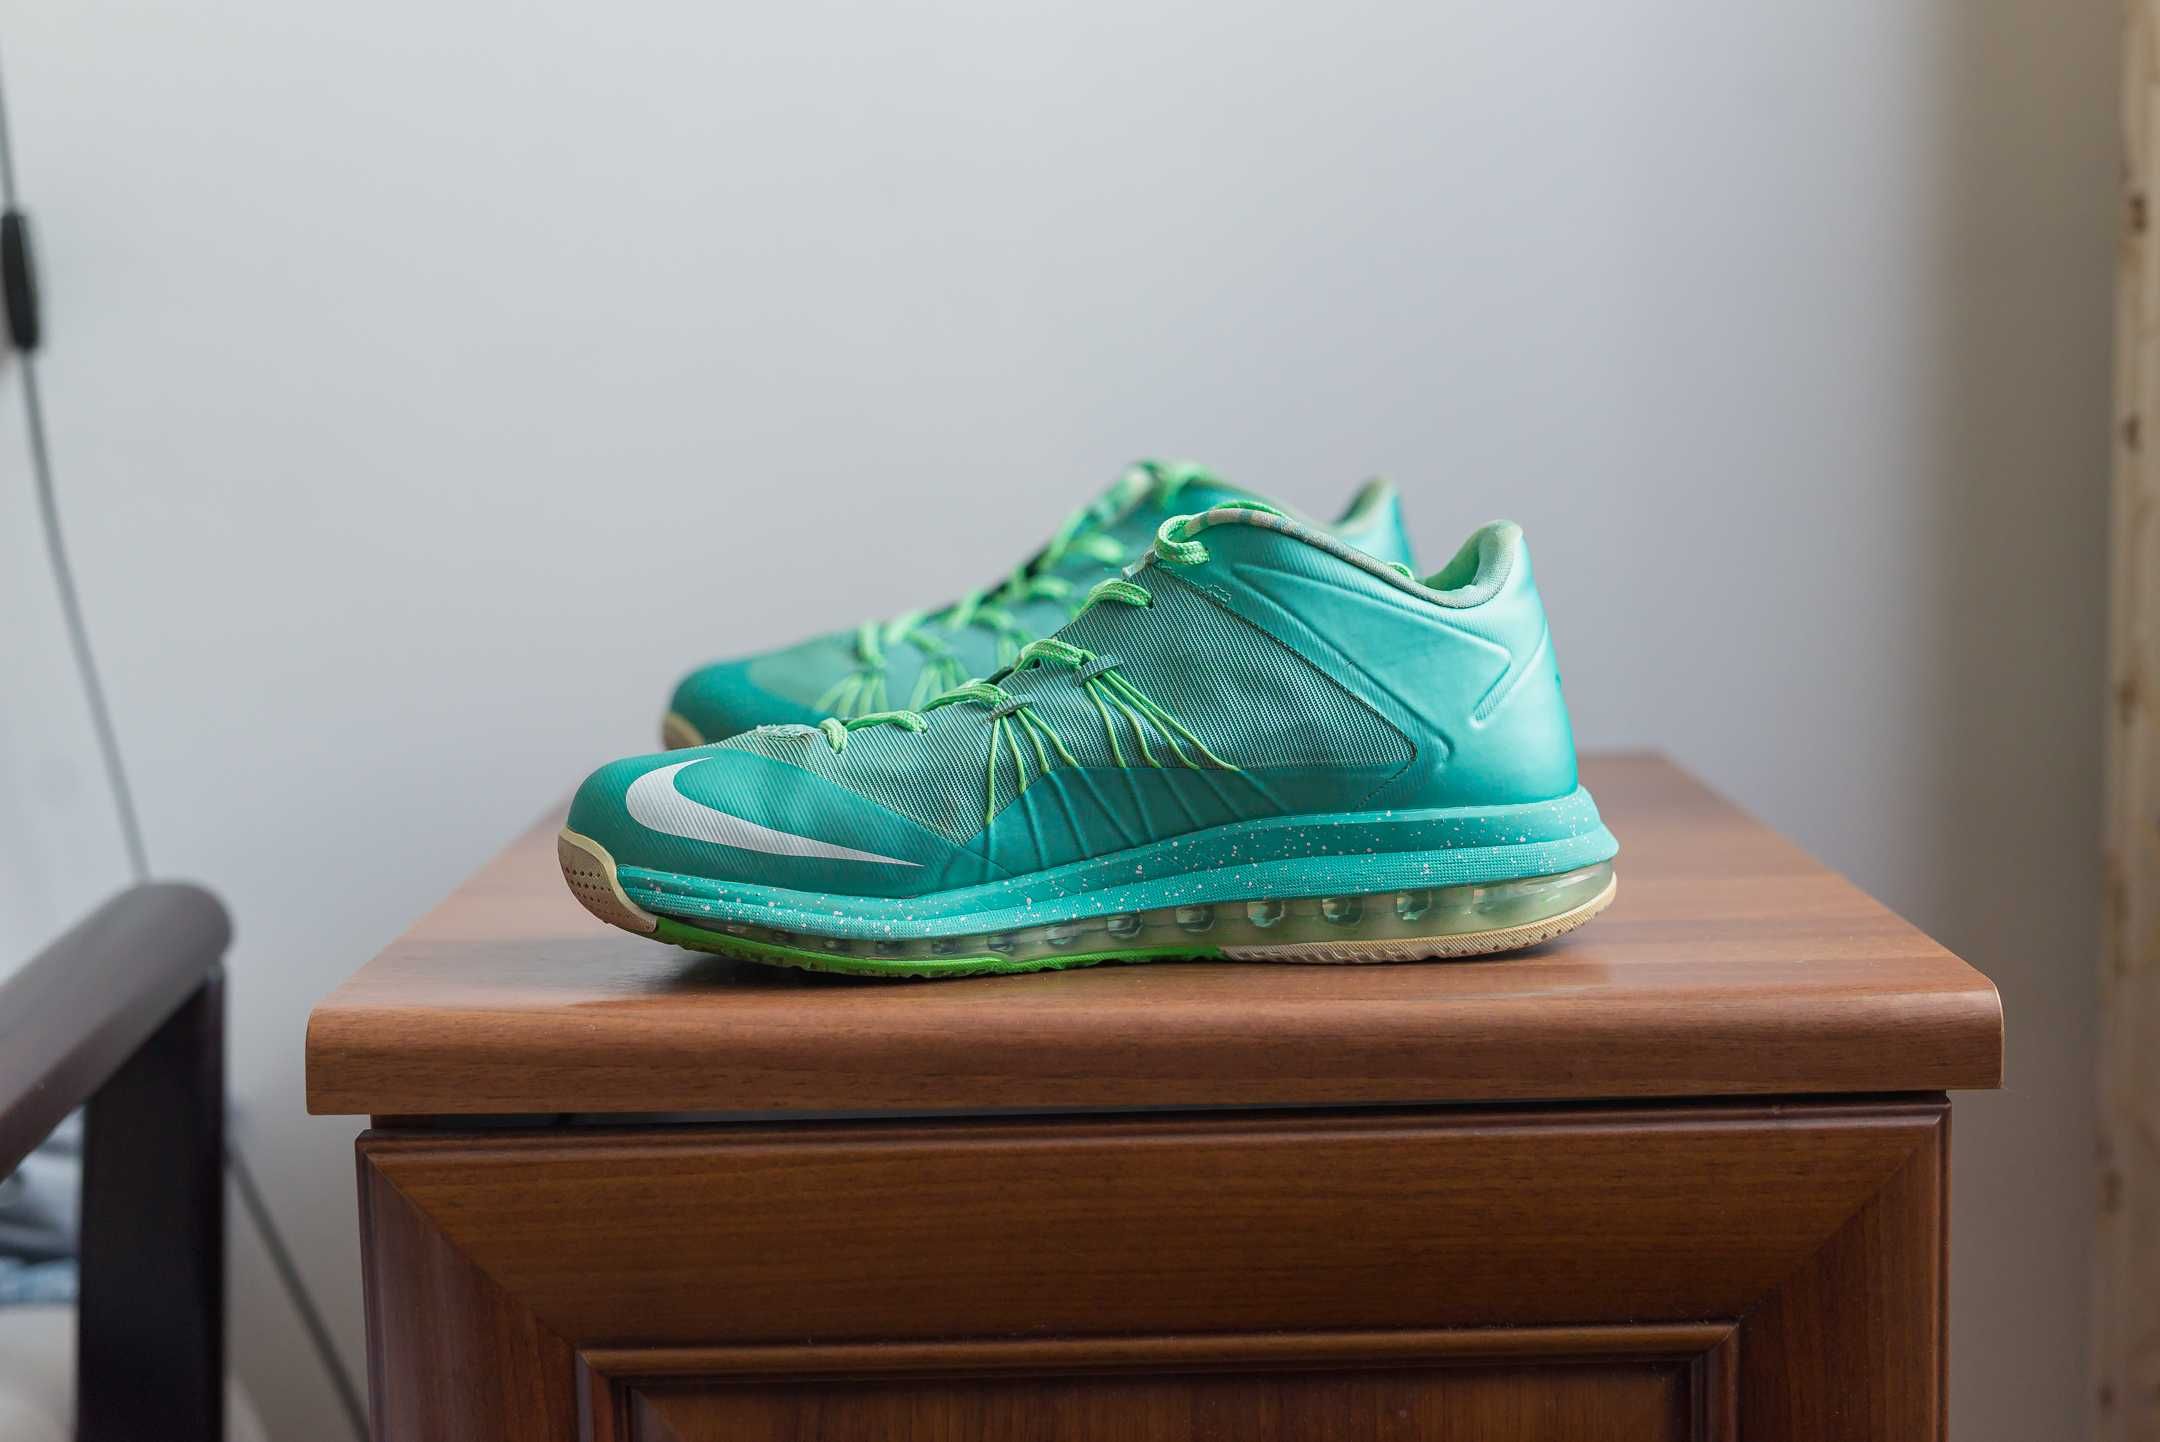 Buty Nike LeBron X Low "Easter" r. 45,5